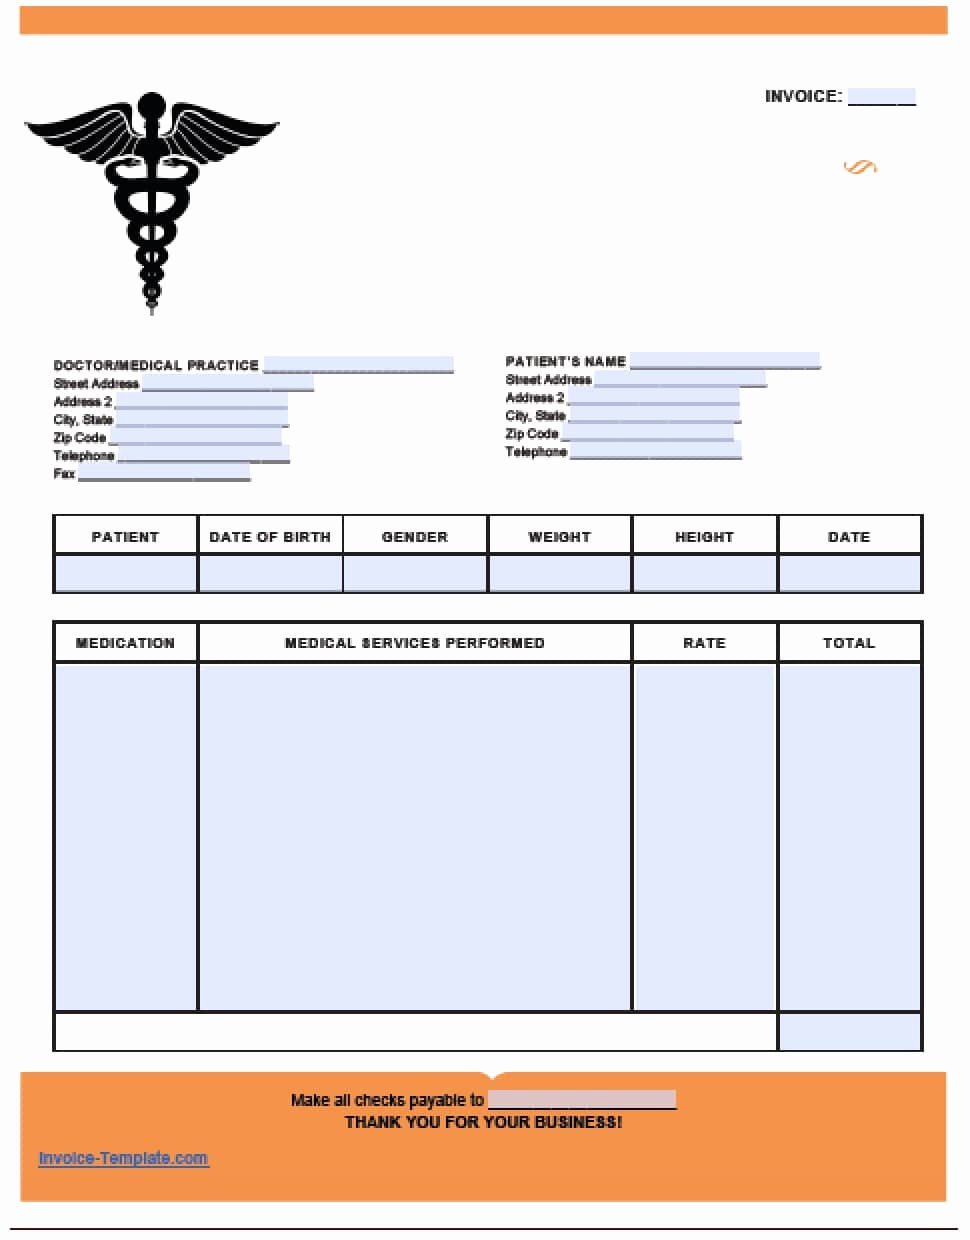 Billing Invoice Template Word Inspirational Free Medical Invoice Template Excel Pdf